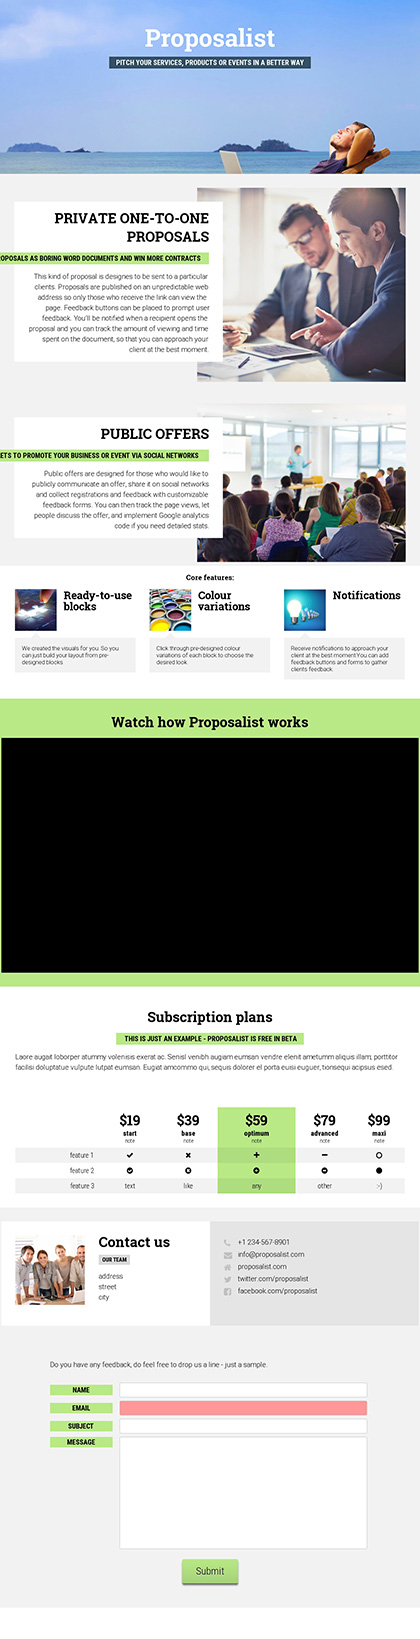 image preview of business proposal 'App page sample'